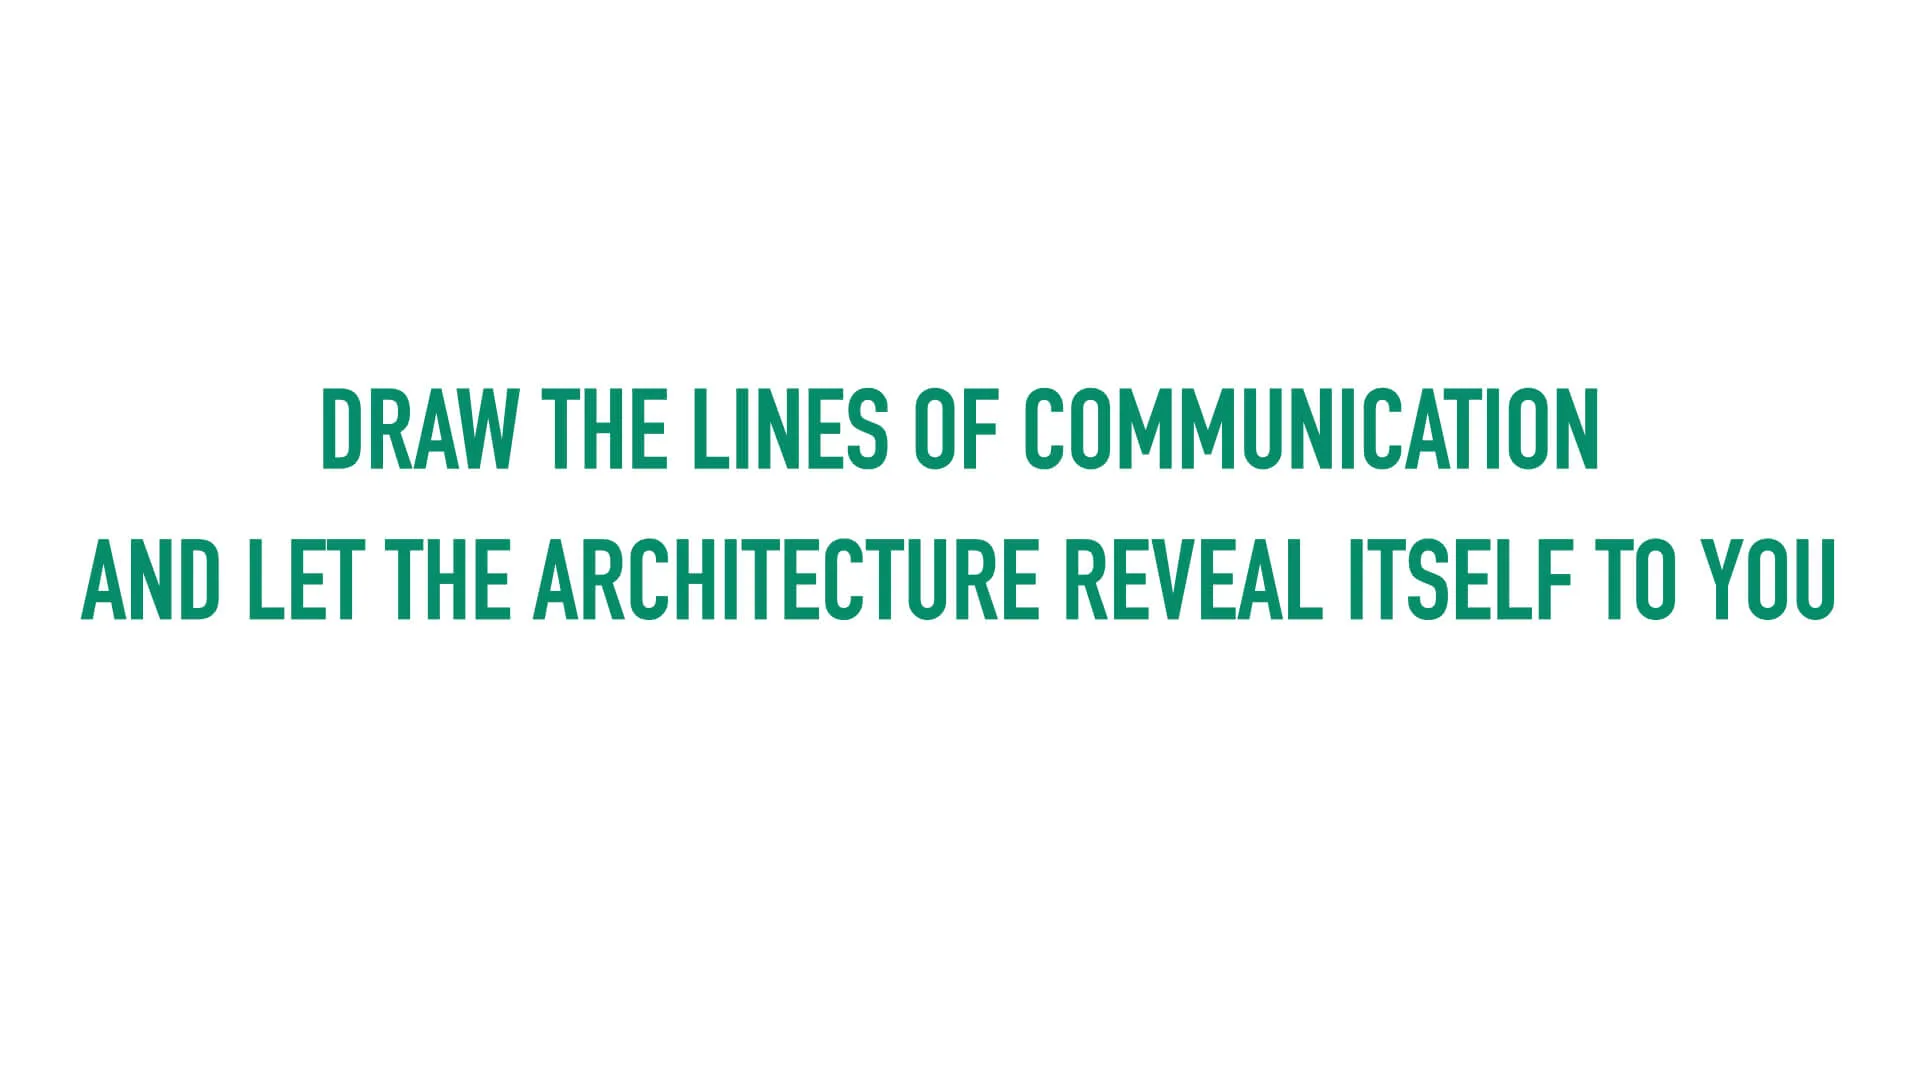 A slide that says "draw the lines of communication and let the architecture reveal itself to you